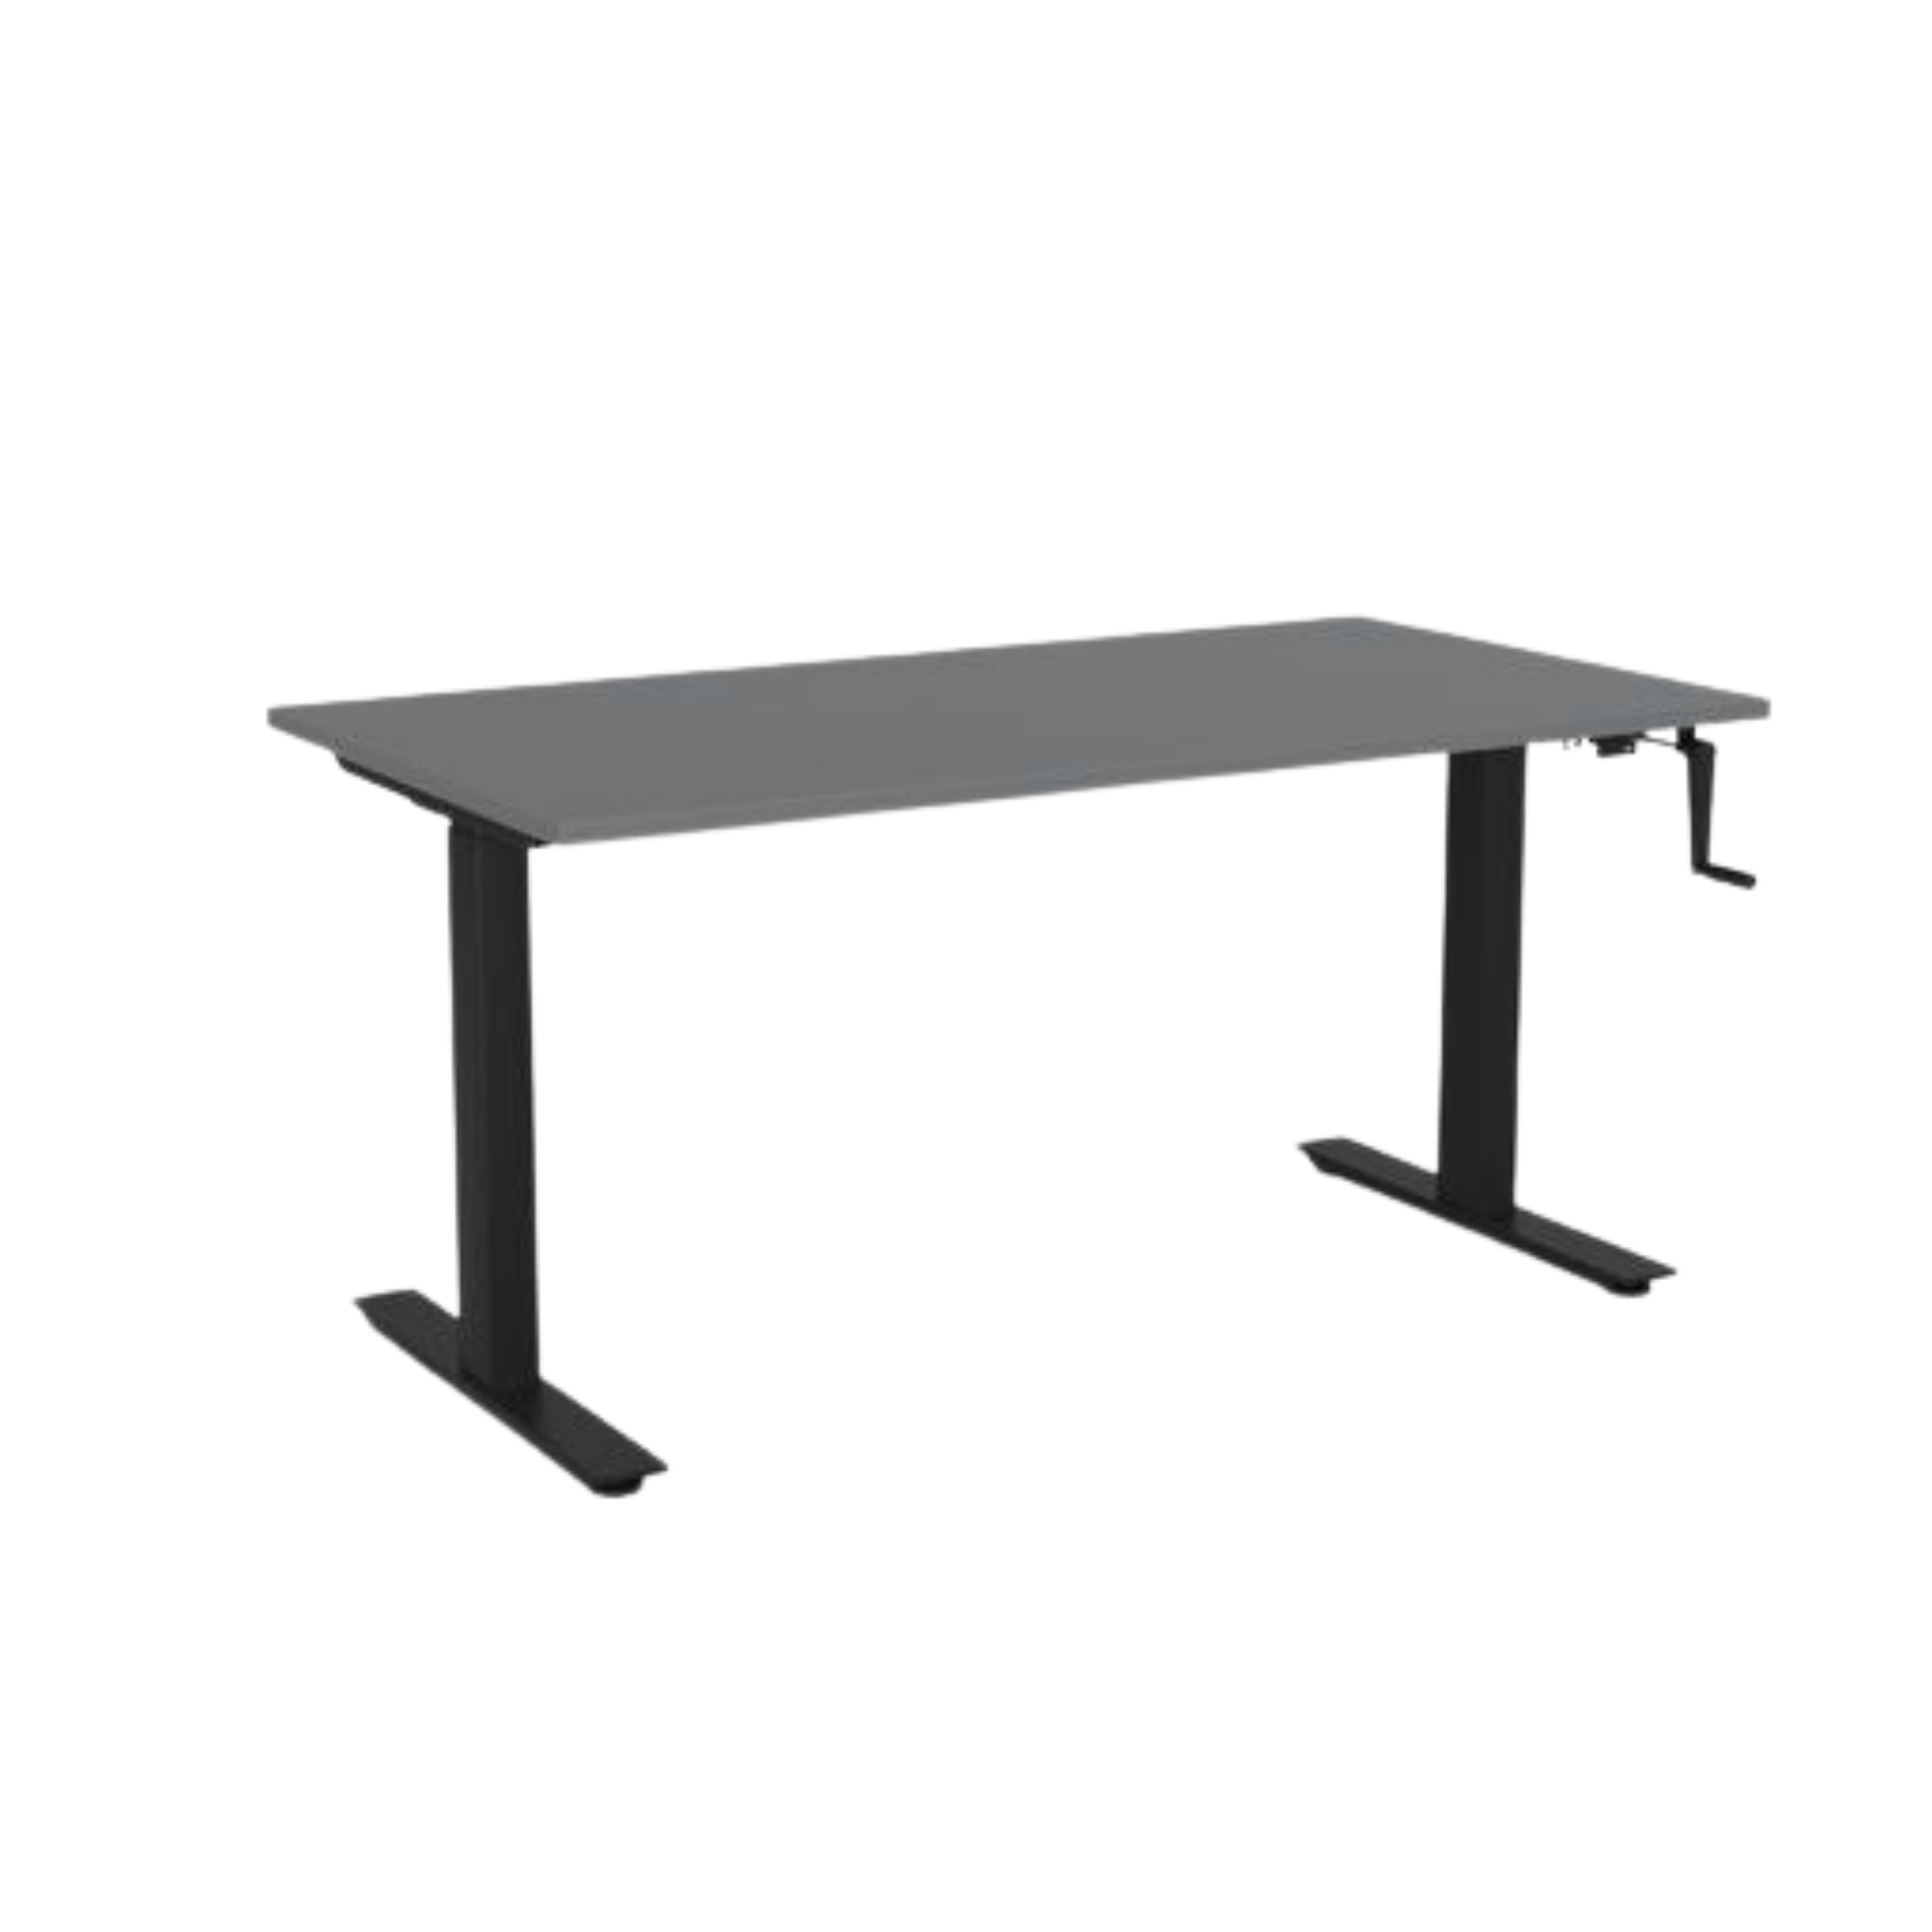 Agile winder sit to stand desk with black frame and silver top